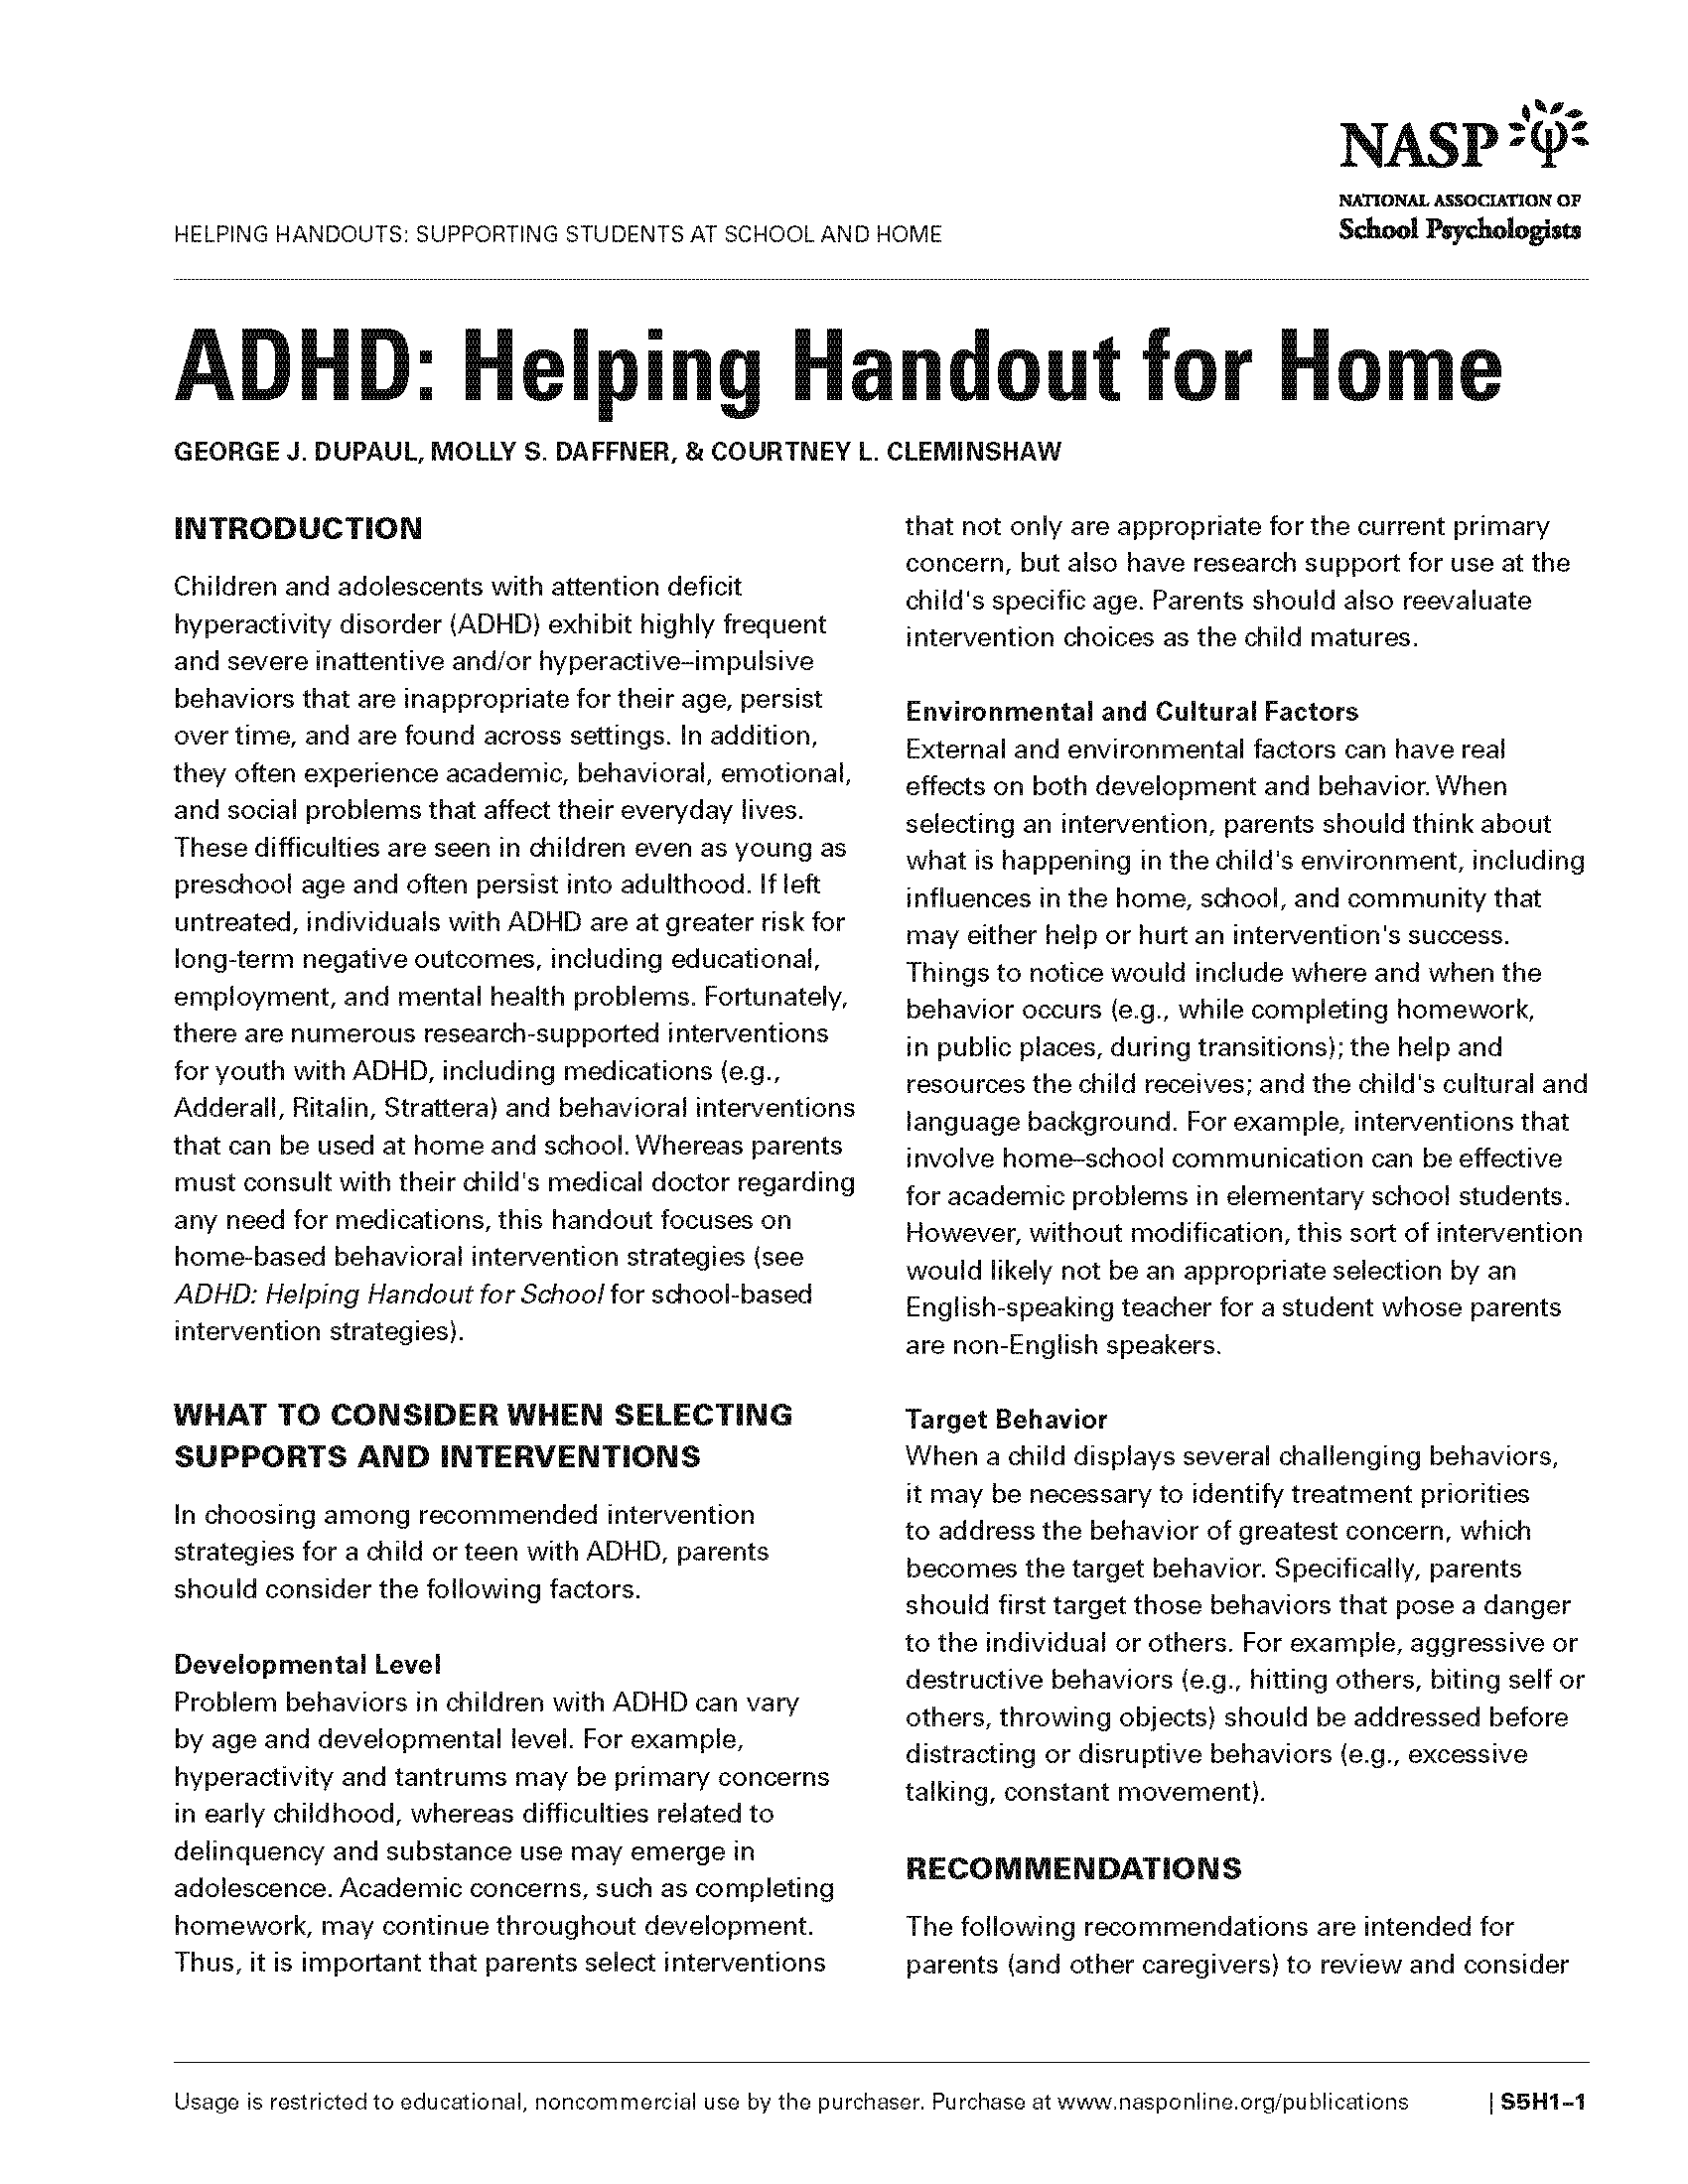 ADHD: Helping Handout for Home